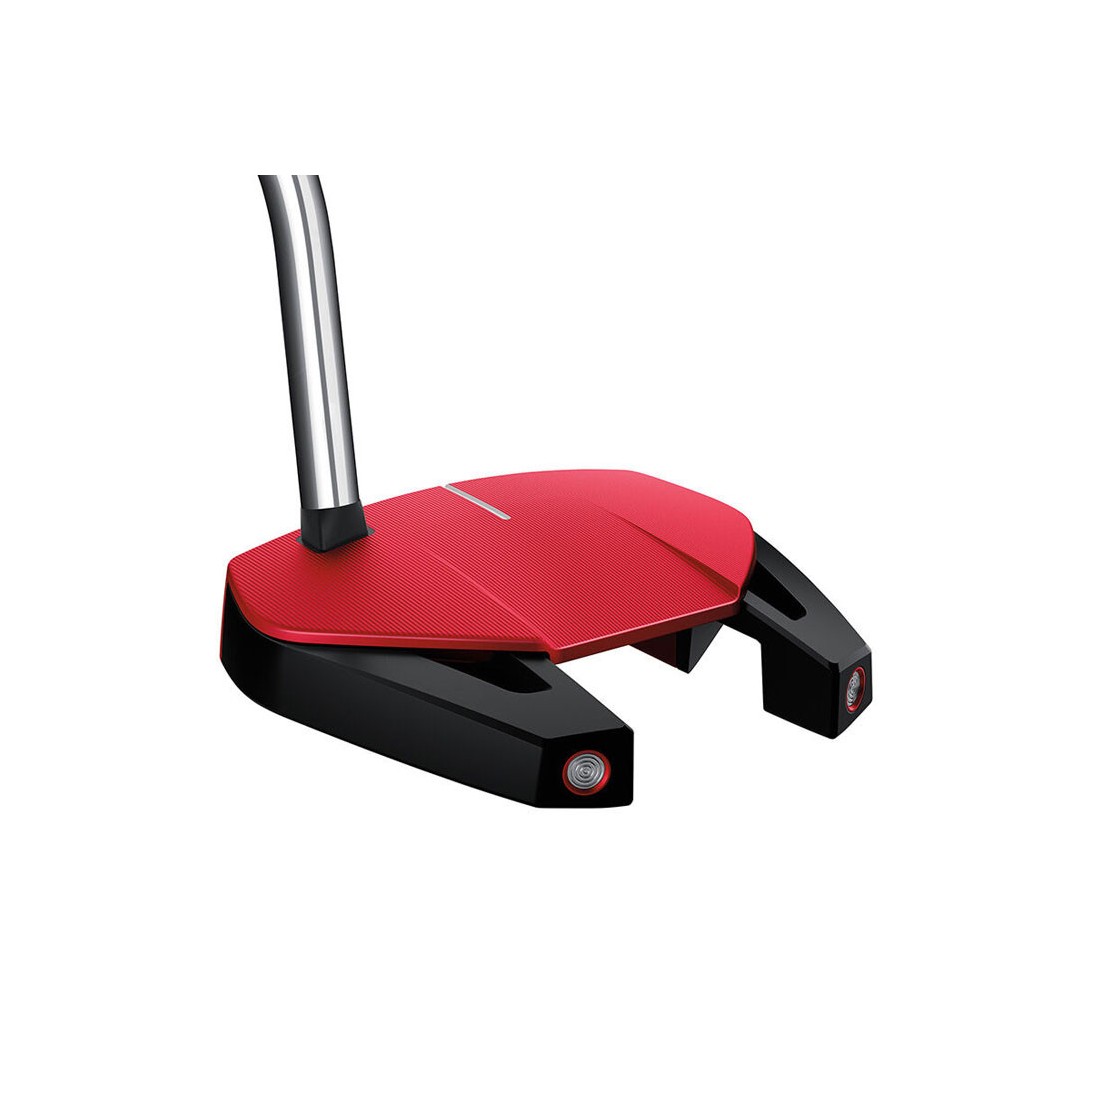 Taylormade putter Spider GT red .SB